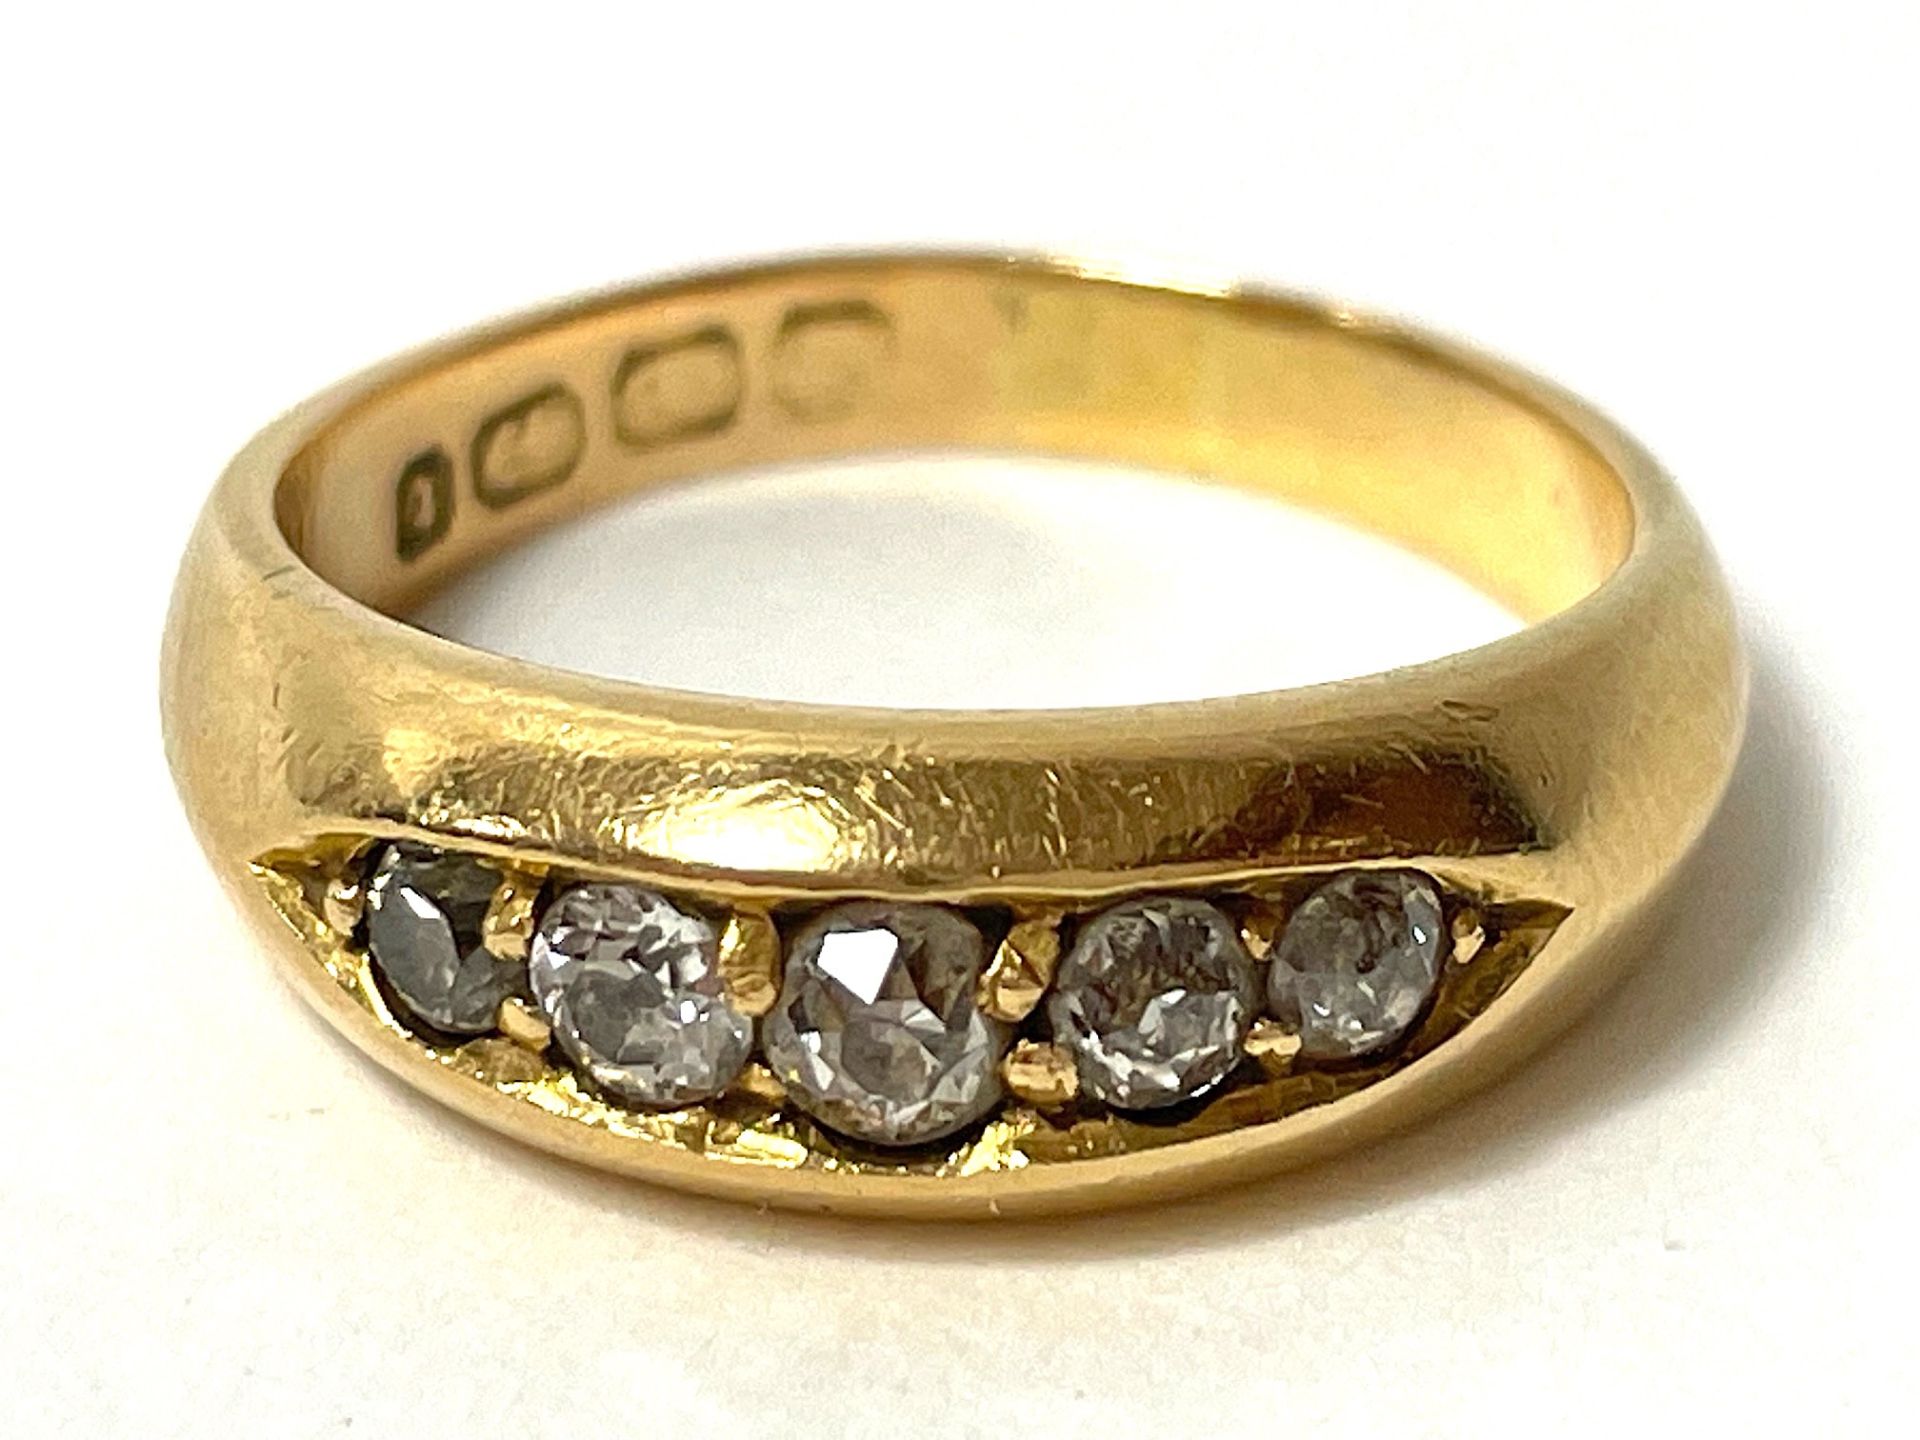 Antique ring with rose-cut diamonds - Image 2 of 6